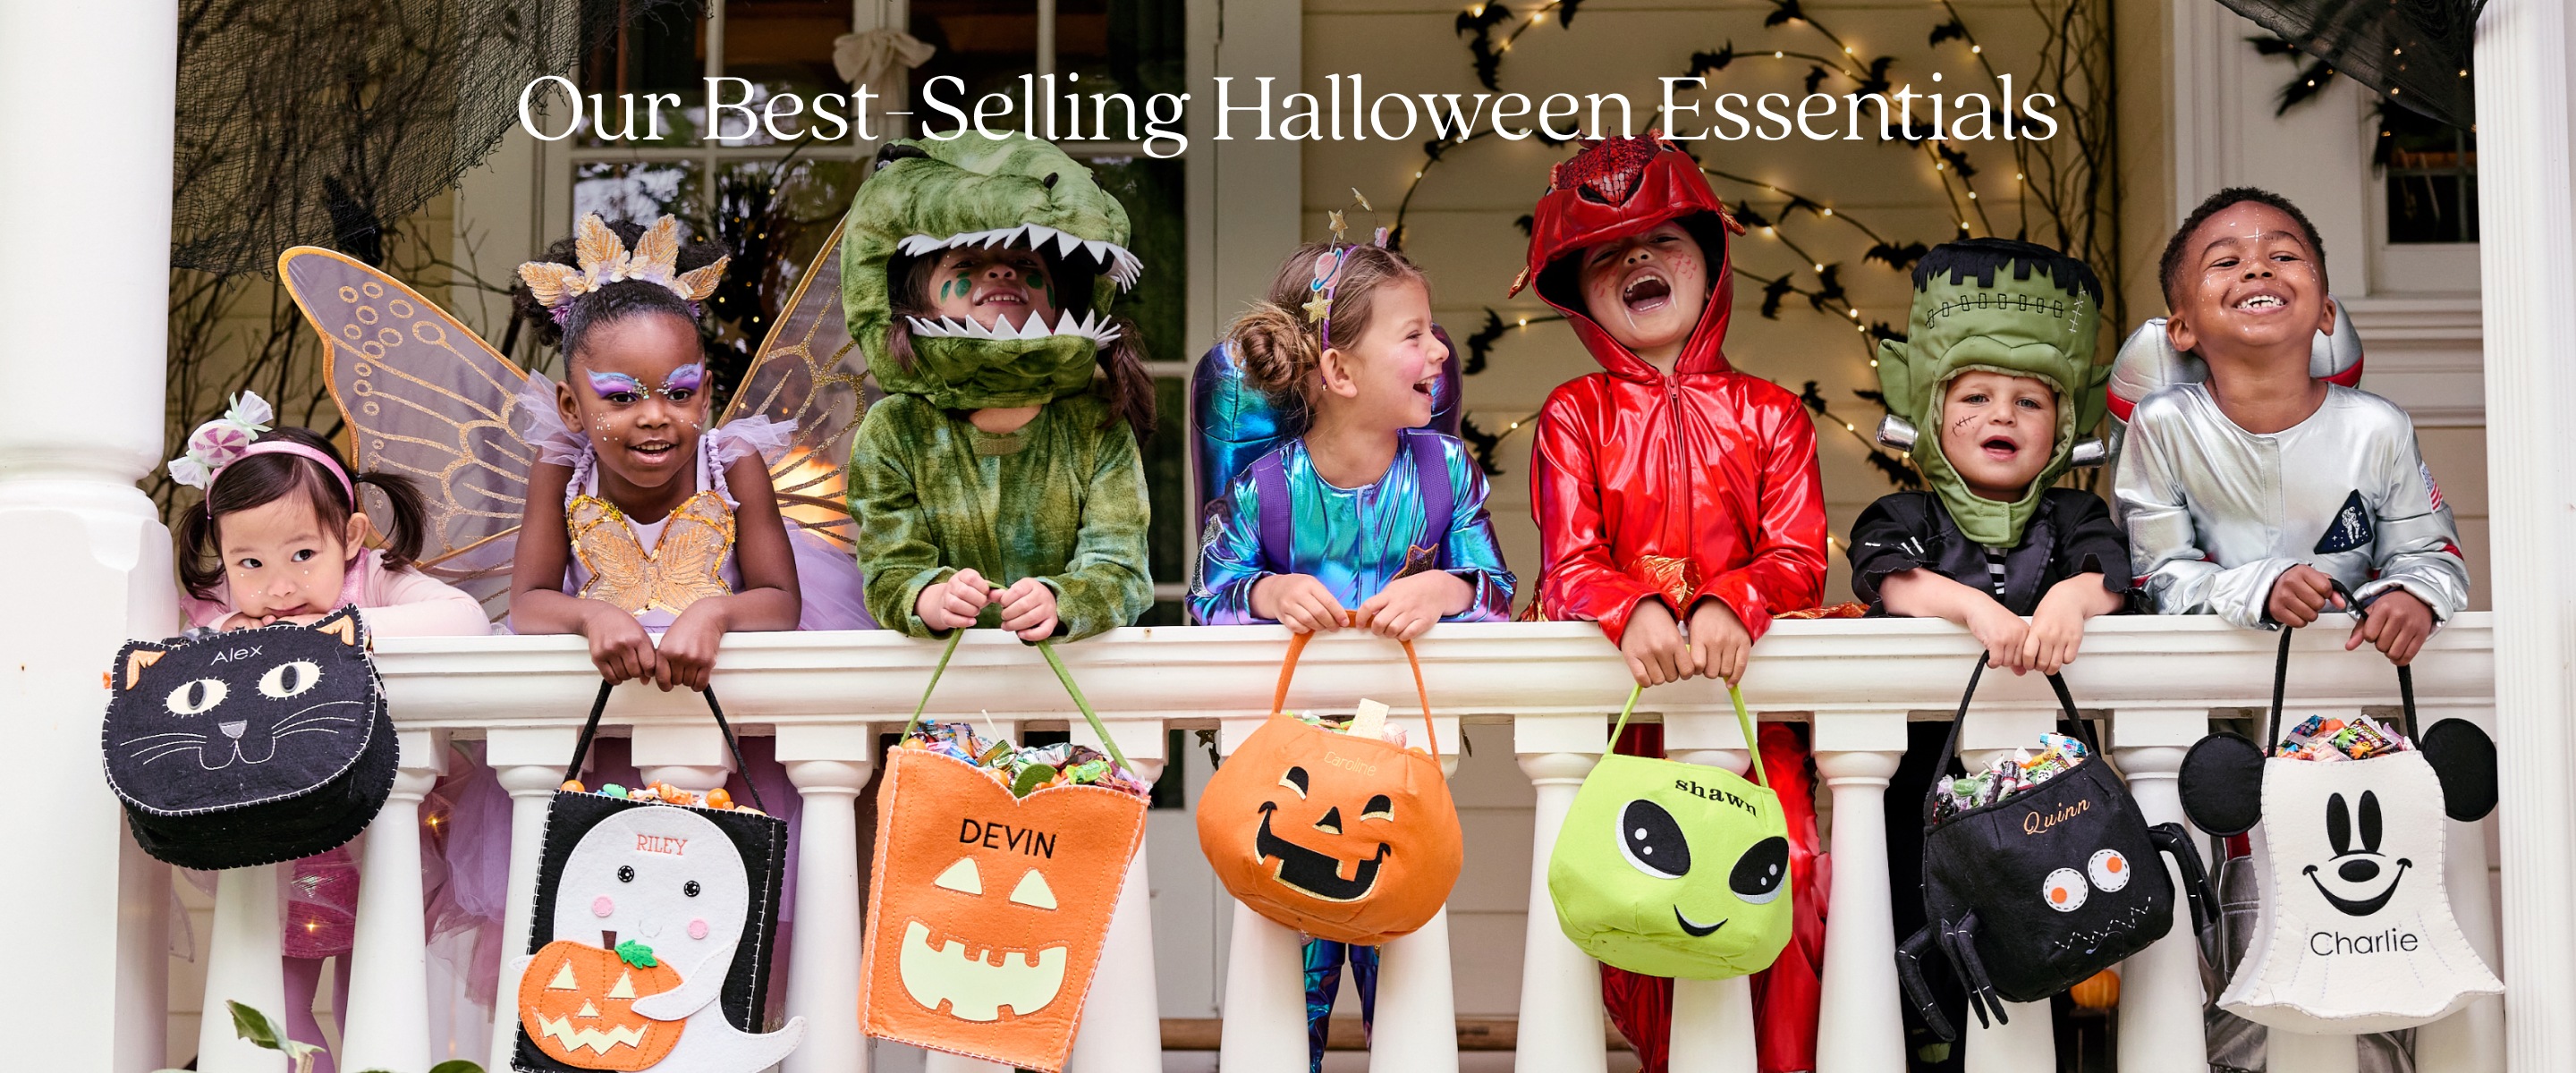 Our Best-Selling Halloween Essentials